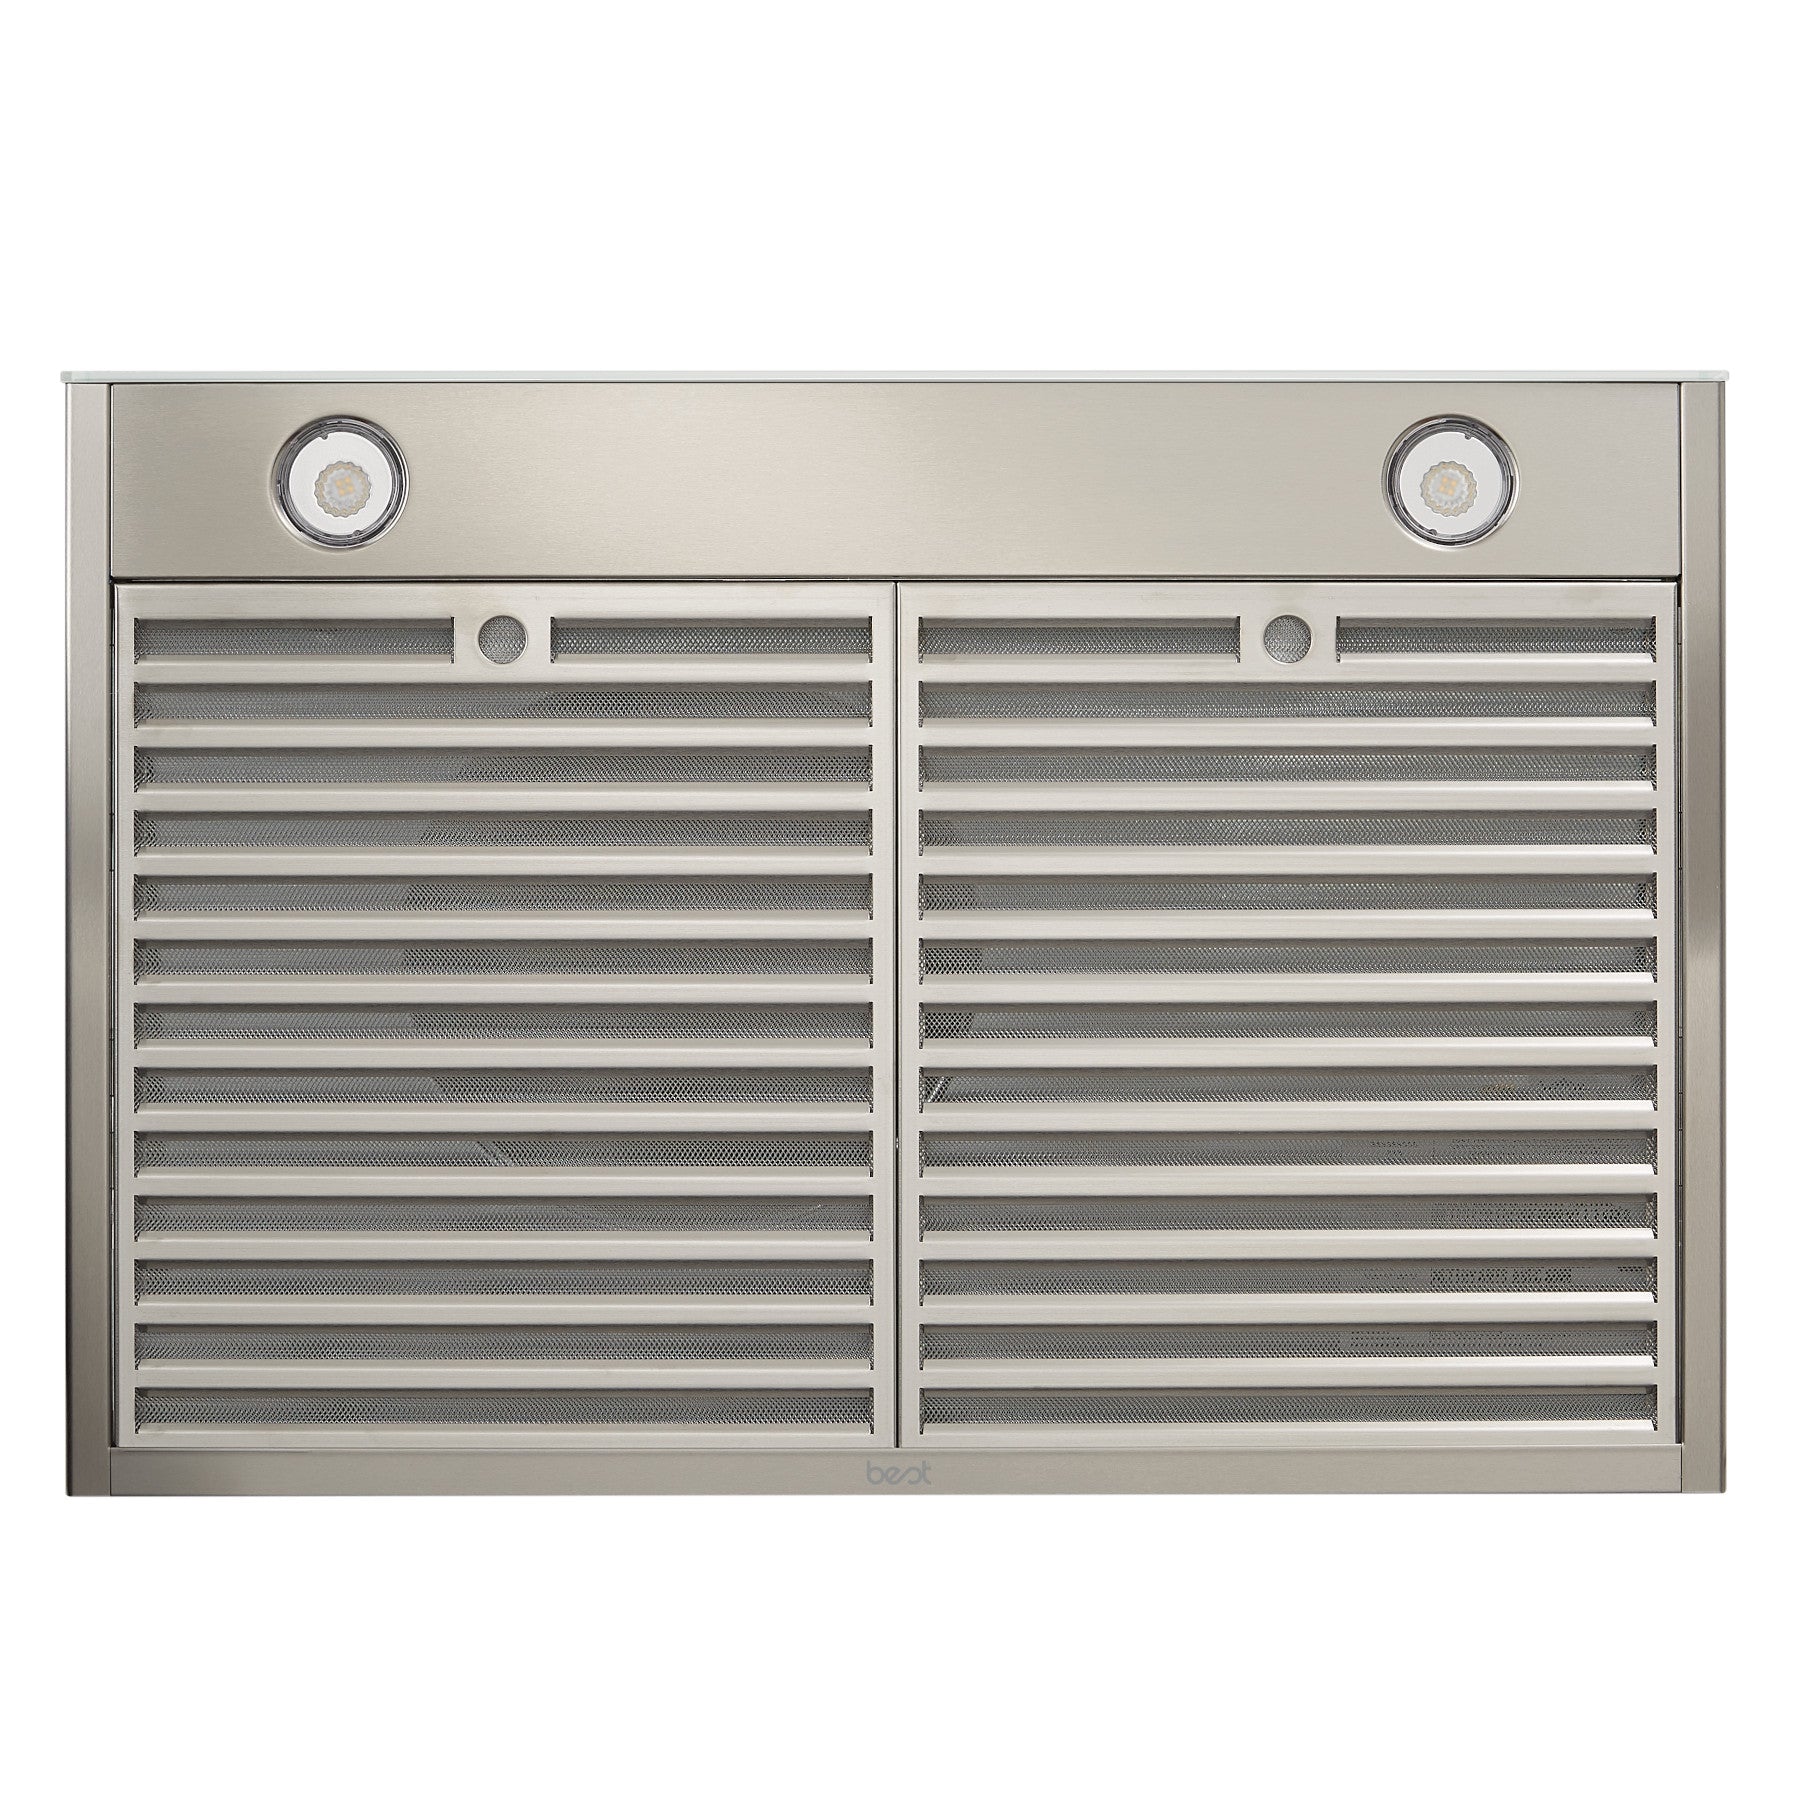 Best - 29.88 Inch 550 CFM Under Cabinet Range Vent in Stainless - UCB3I30SBW